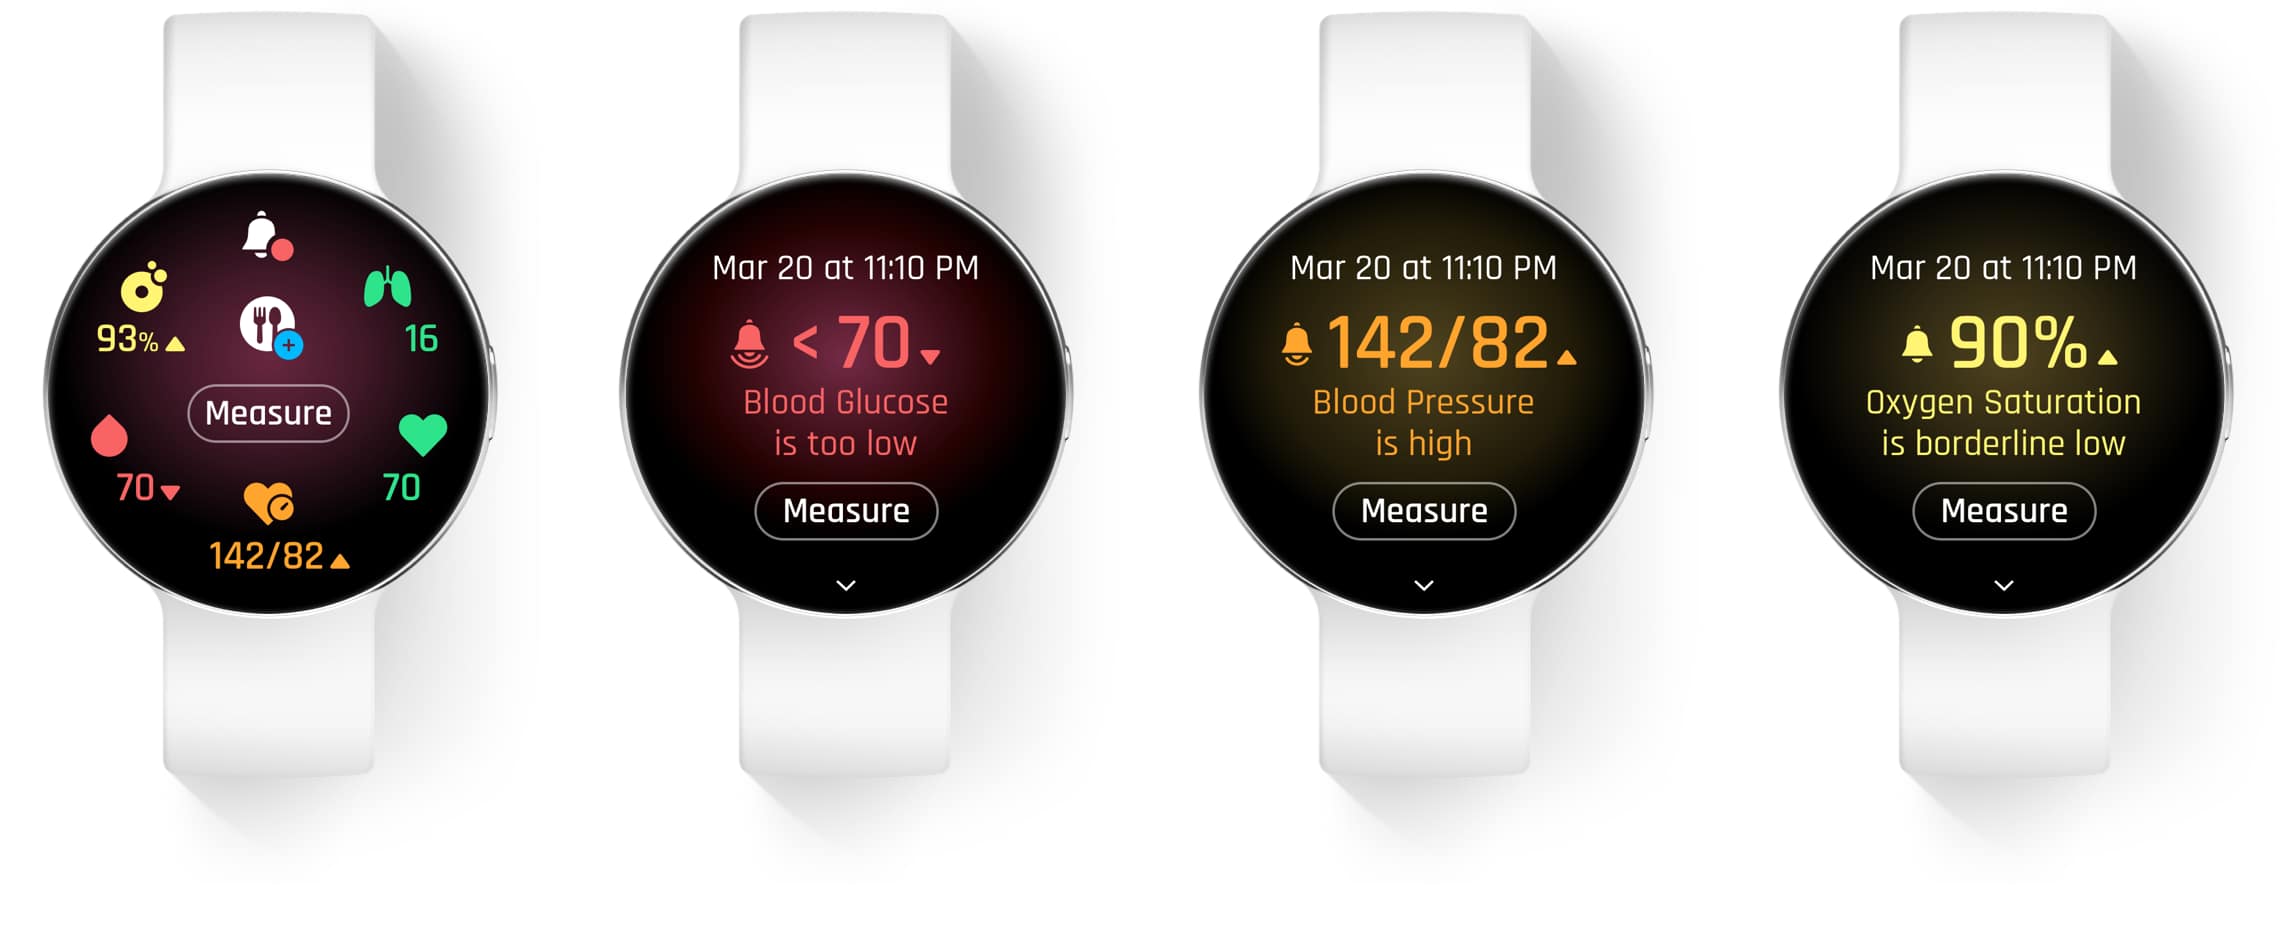 Series of screen designs showing user flow for measuring vital signs (blood glucose, blood pressure, and oxygen saturation)